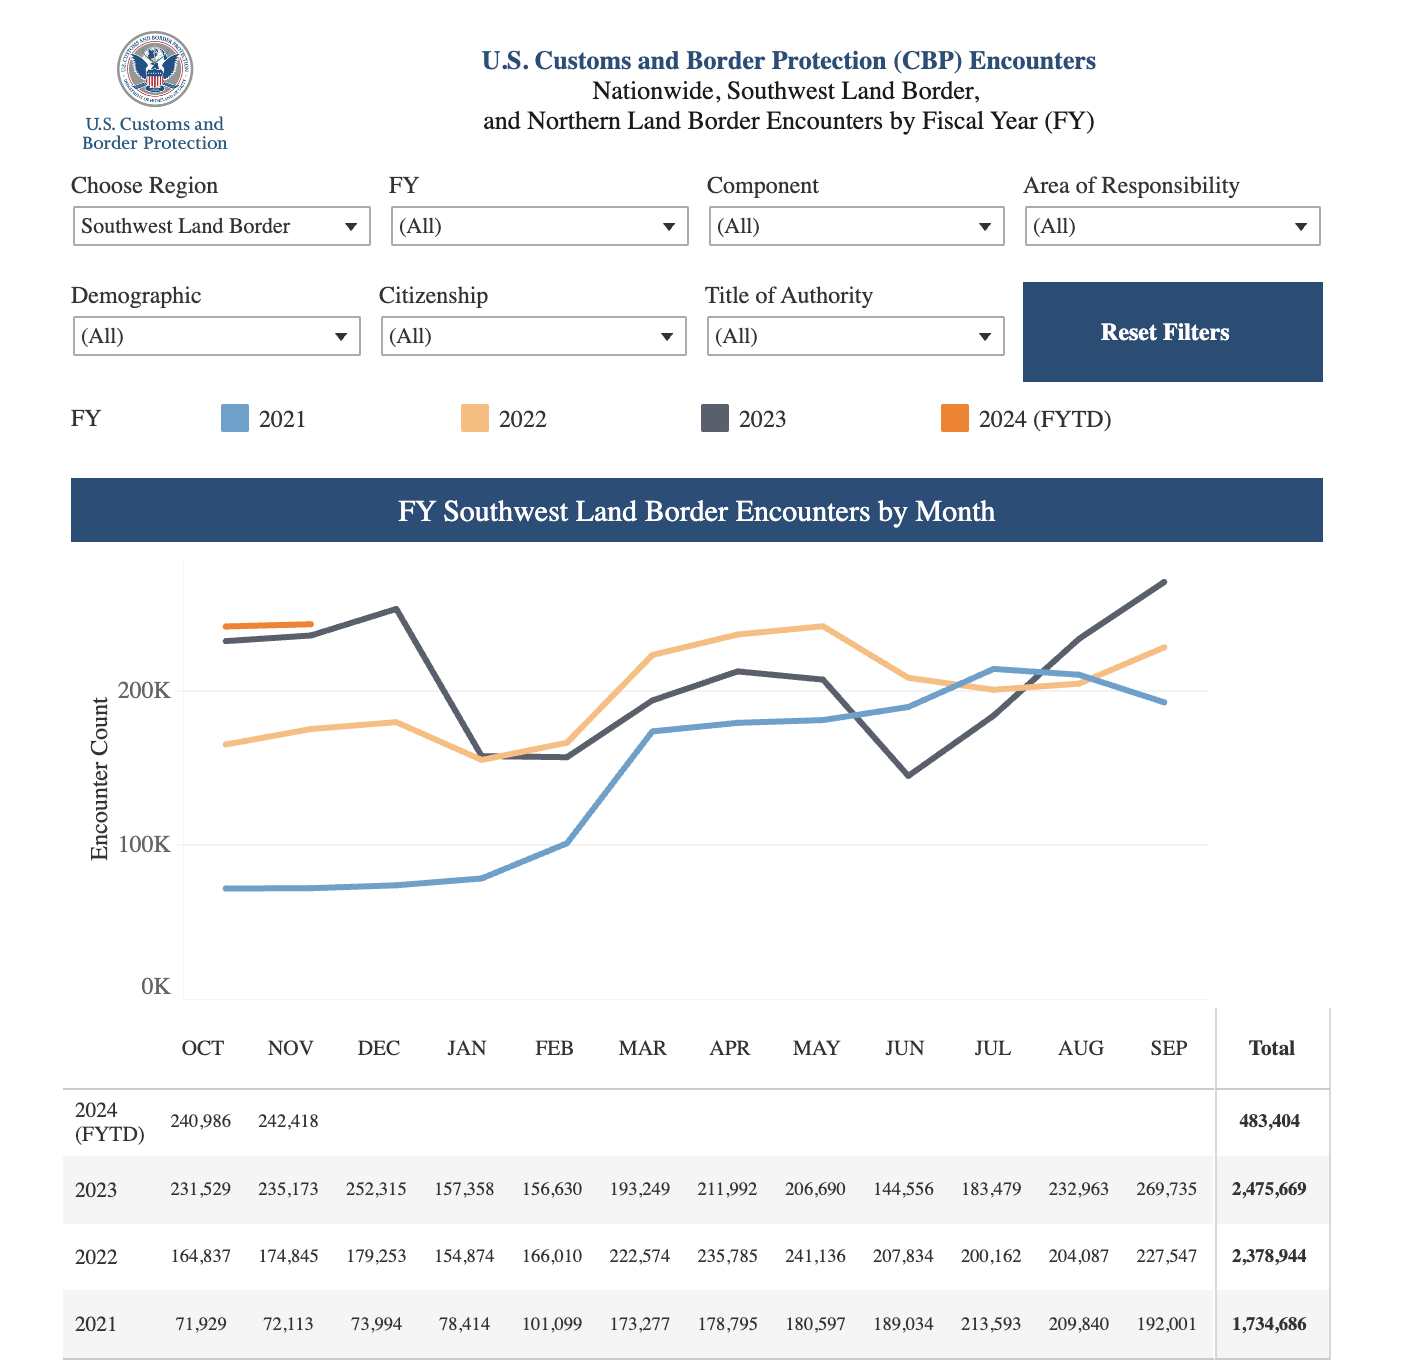 U.S. Customs and Border Protection figures show monthly encounters at the U.S.-Mexico border